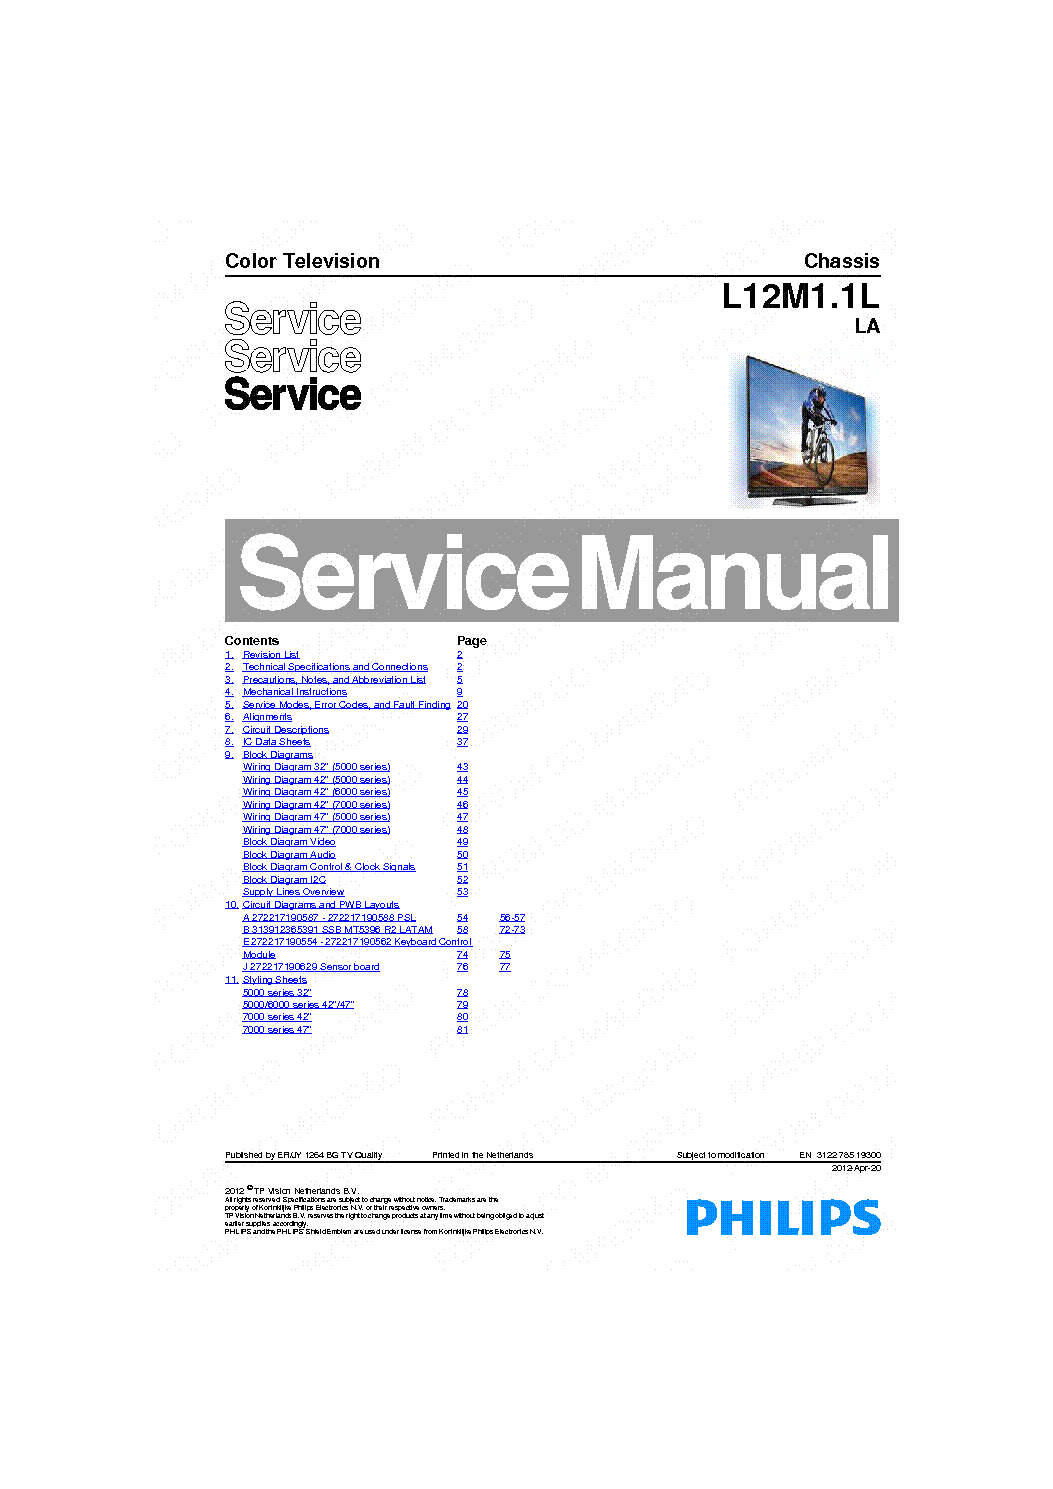 PHILIPS 42PFL5007 42PFL7007 CHASSIS L12M1.1L SM service manual (1st page)